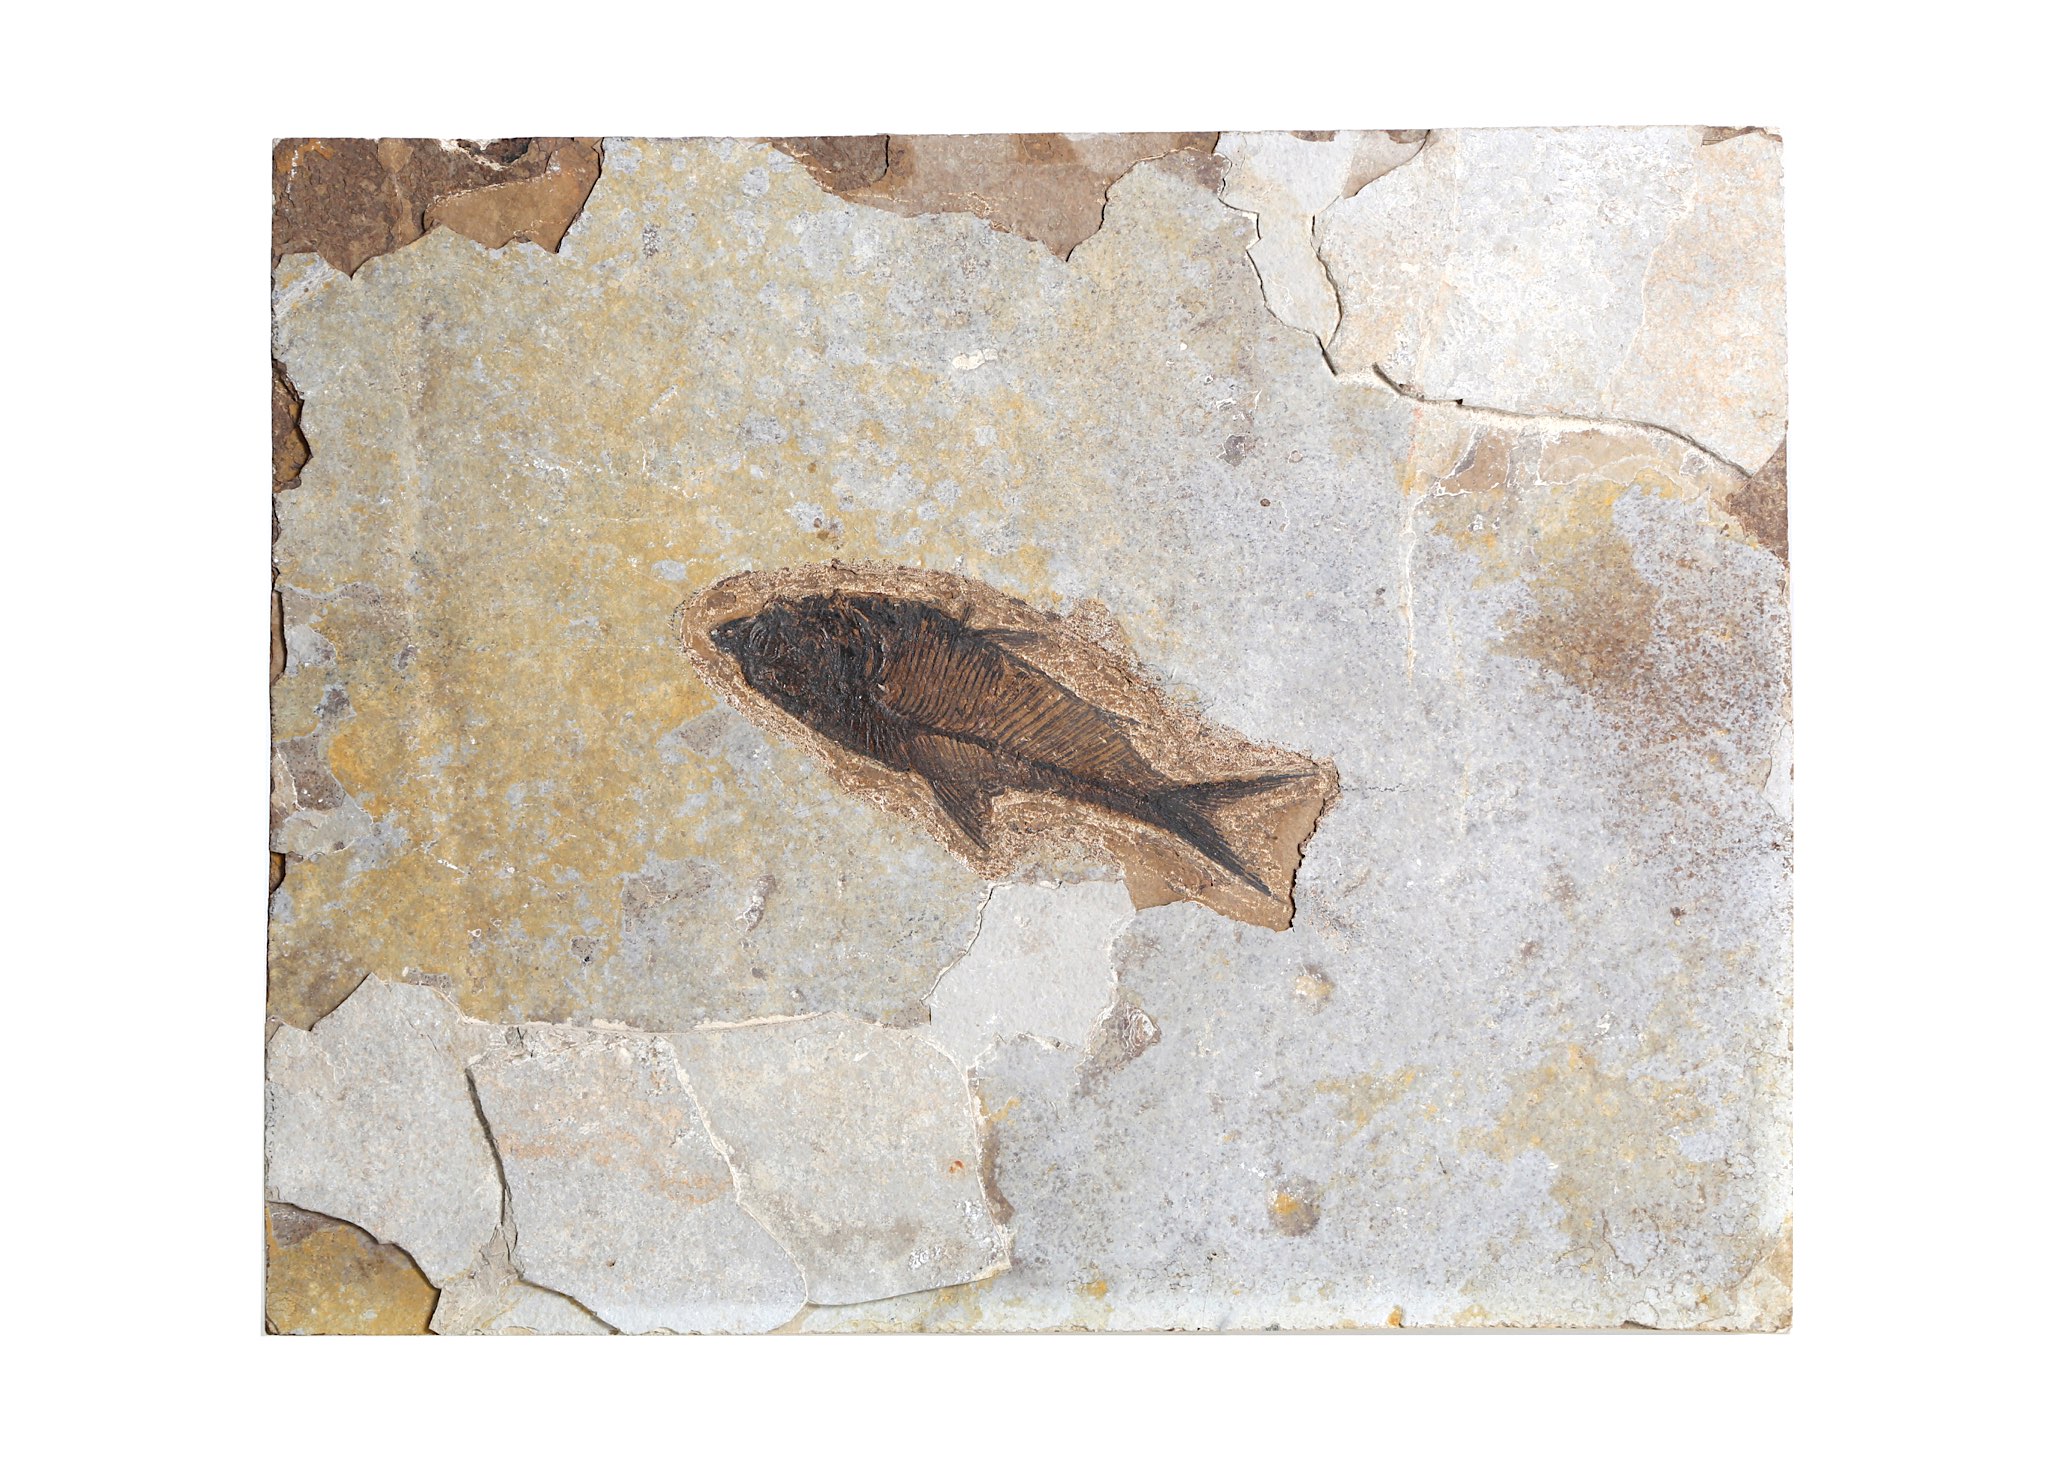 A DIPLOMYSTUS FOSSIL FISH Eocene Period, 58 - 36 million years BP A fossil from the Green River